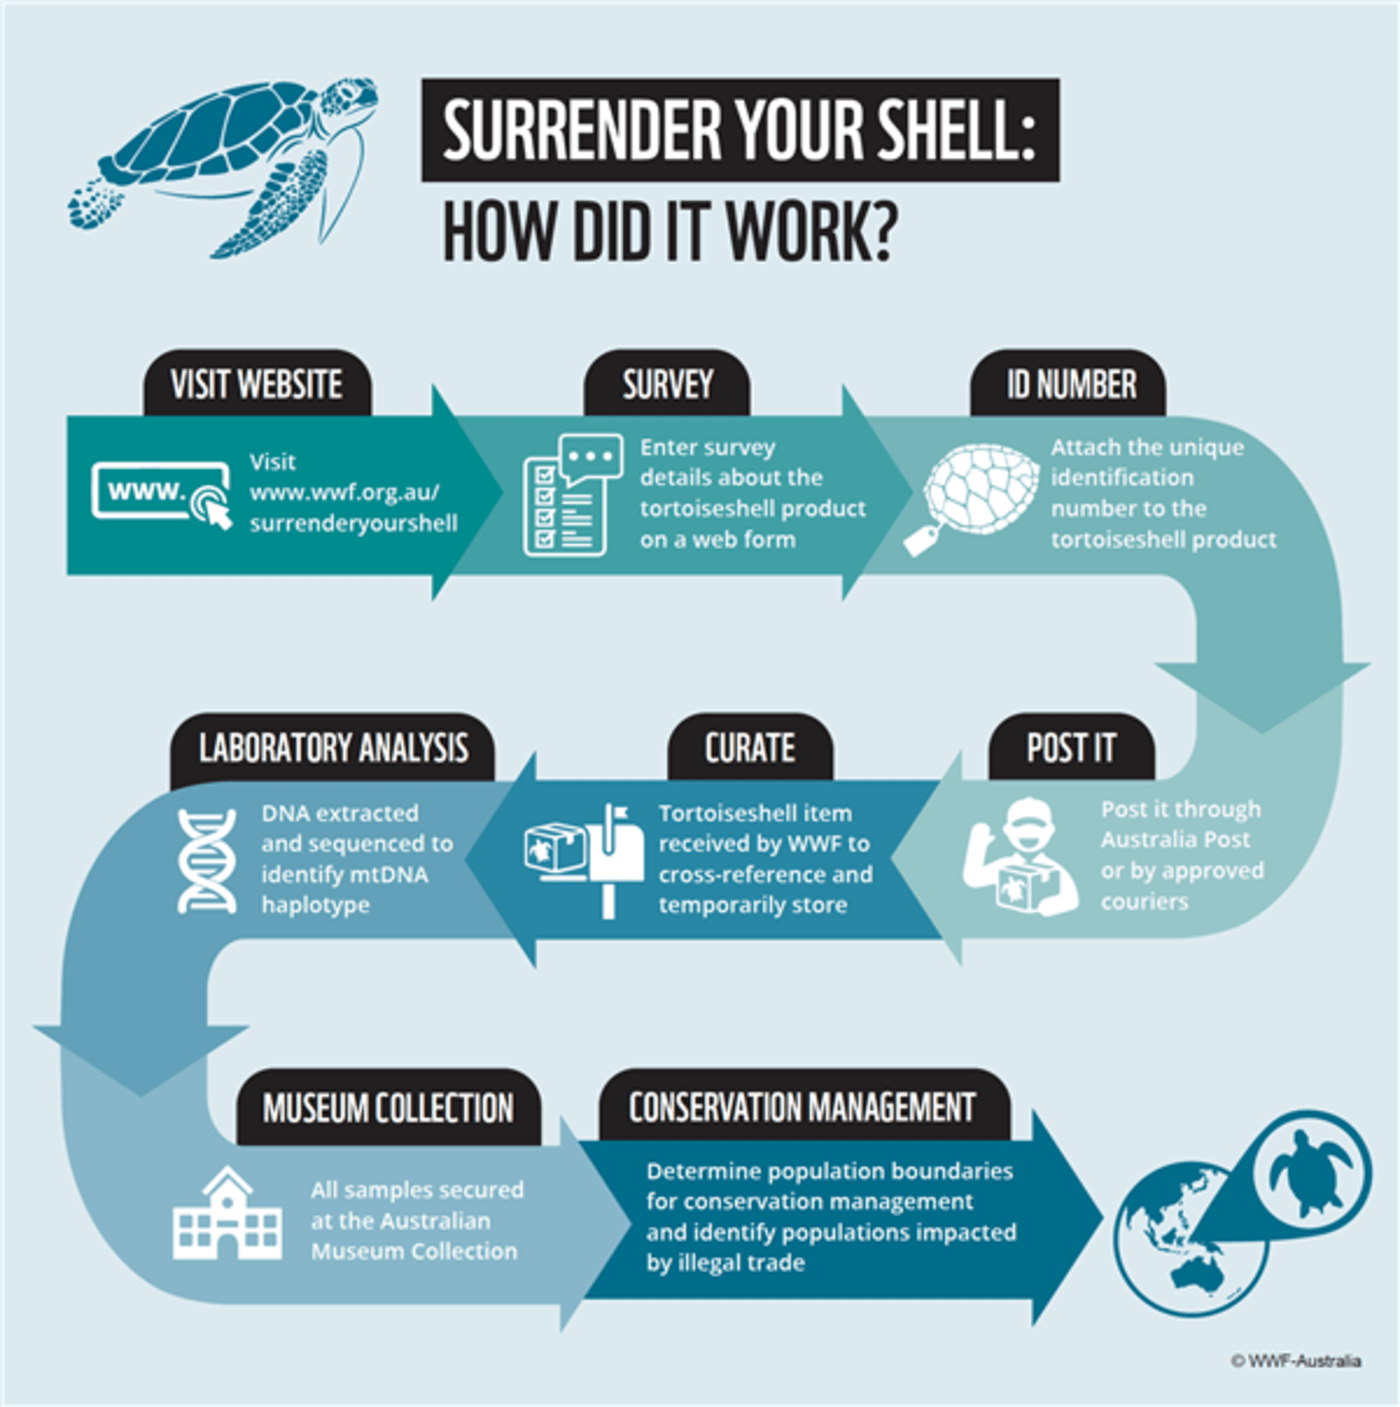 A graphic depicting the process behind the Surrender Your Shell project. First, users visit the WWF website and fill out a survey about the tortoiseshell product they have. They then attach a unique ID number to the product and send it to WWF. DNA is then extracted from the products and data is collected by the Australian Museum and used to assist in conservation management.